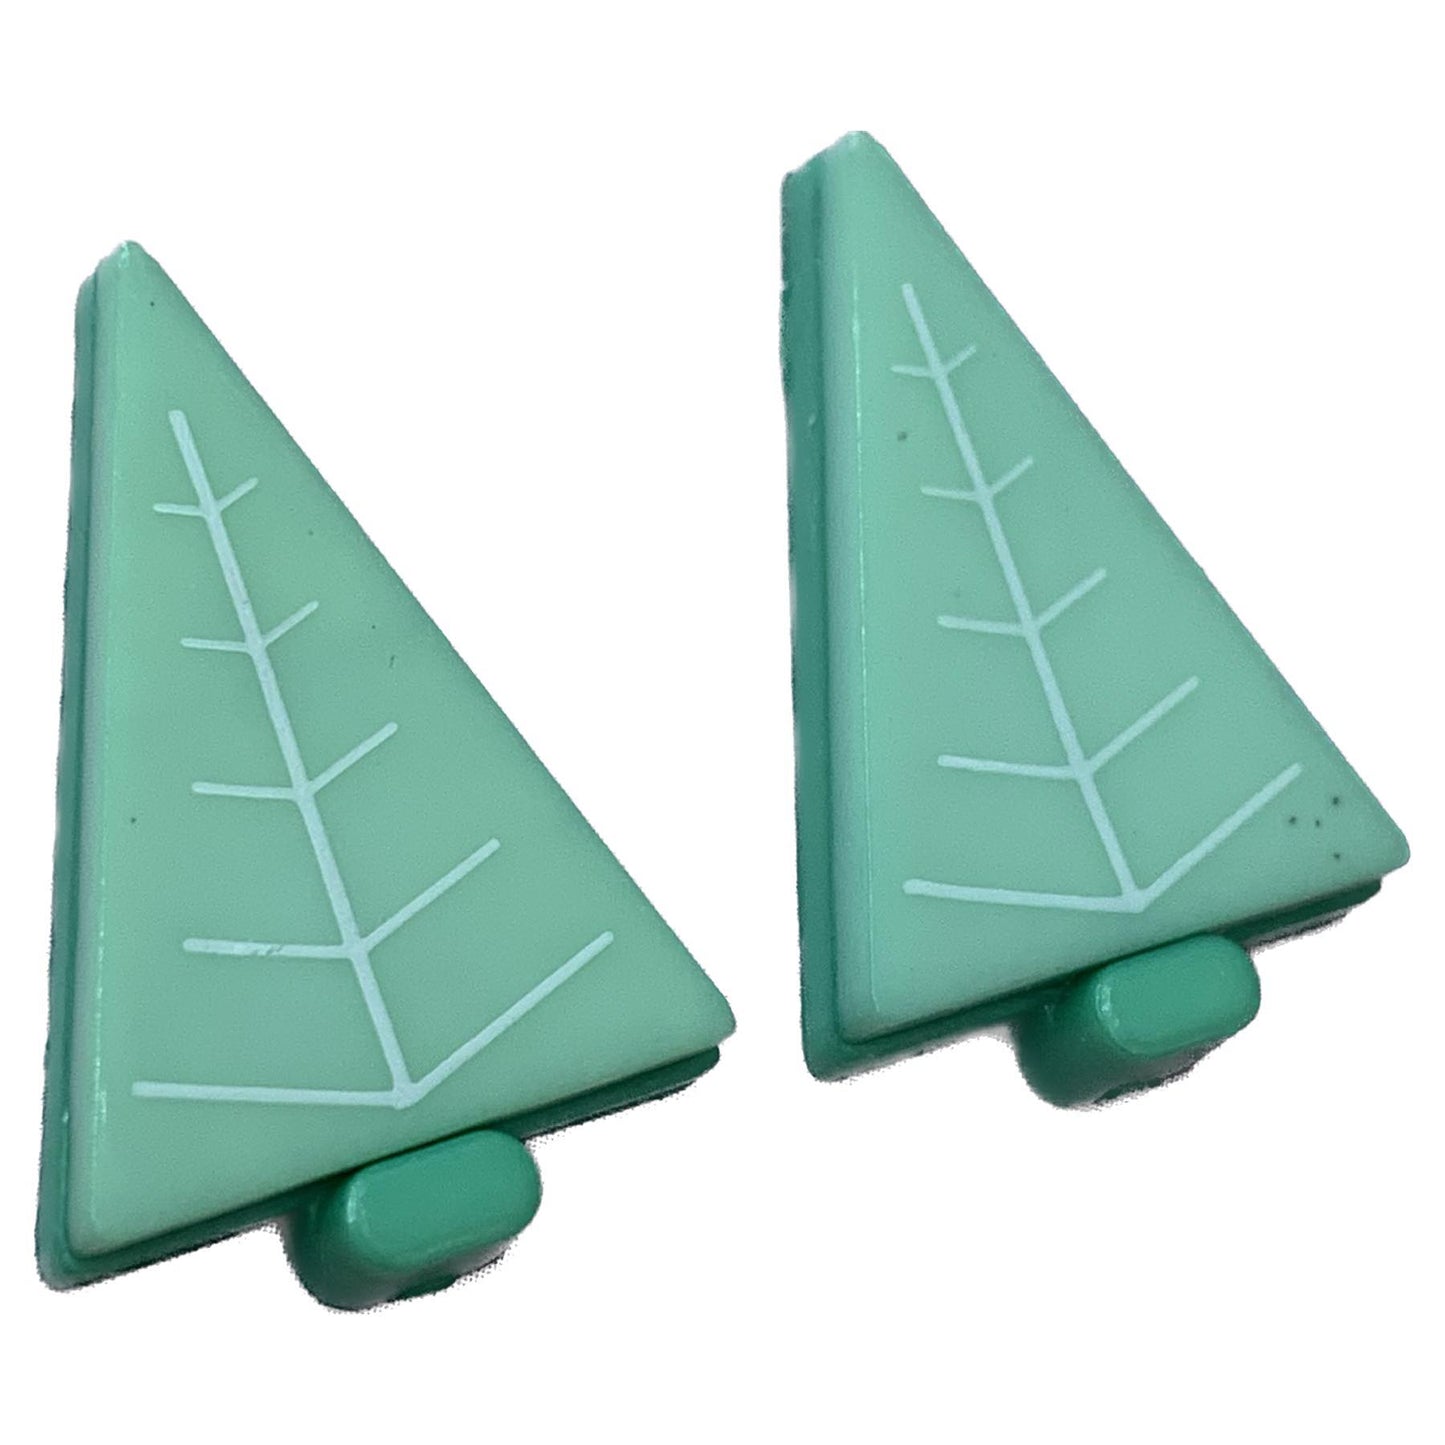 MAKIN' WHOOPEE - Button Christmas Tree Studs- Green